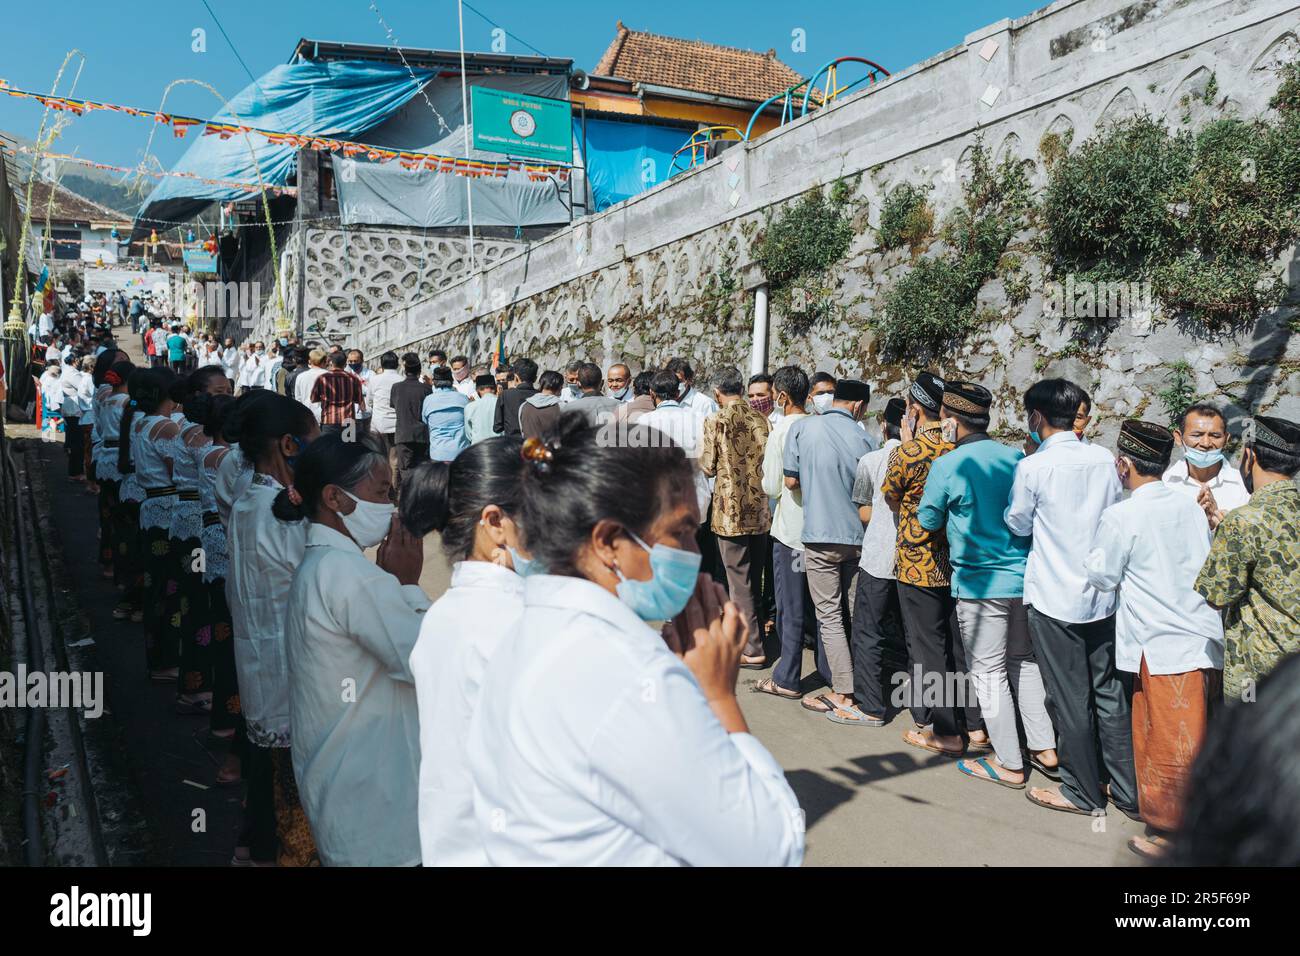 Muslim and all villagers shake hands and congratulate Buddhists who celebrate the holy day of Vesak in Thekelan village, Semarang regency, Indonesia - Stock Photo